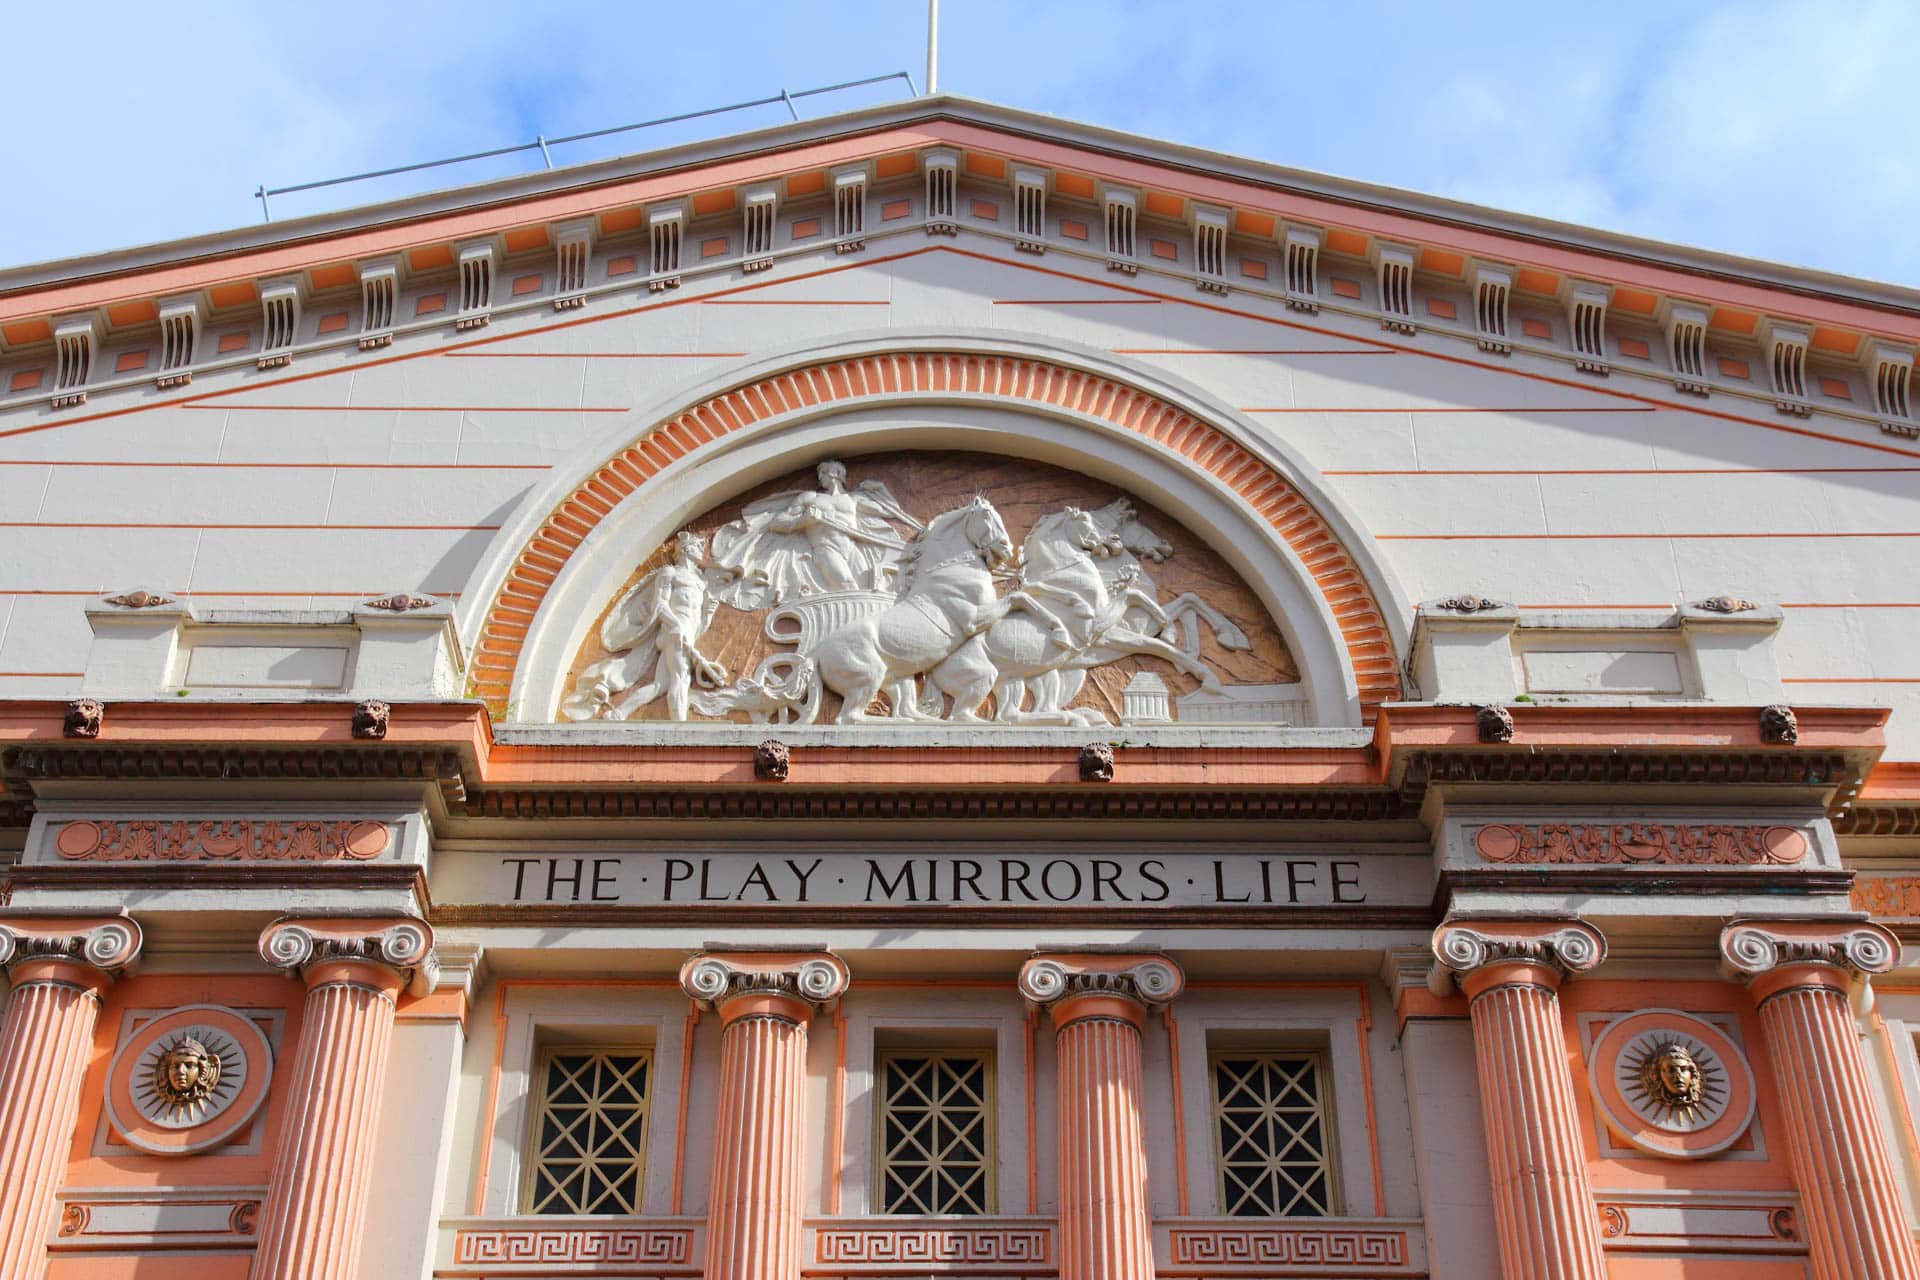 Outside building of the Manchester Opera House